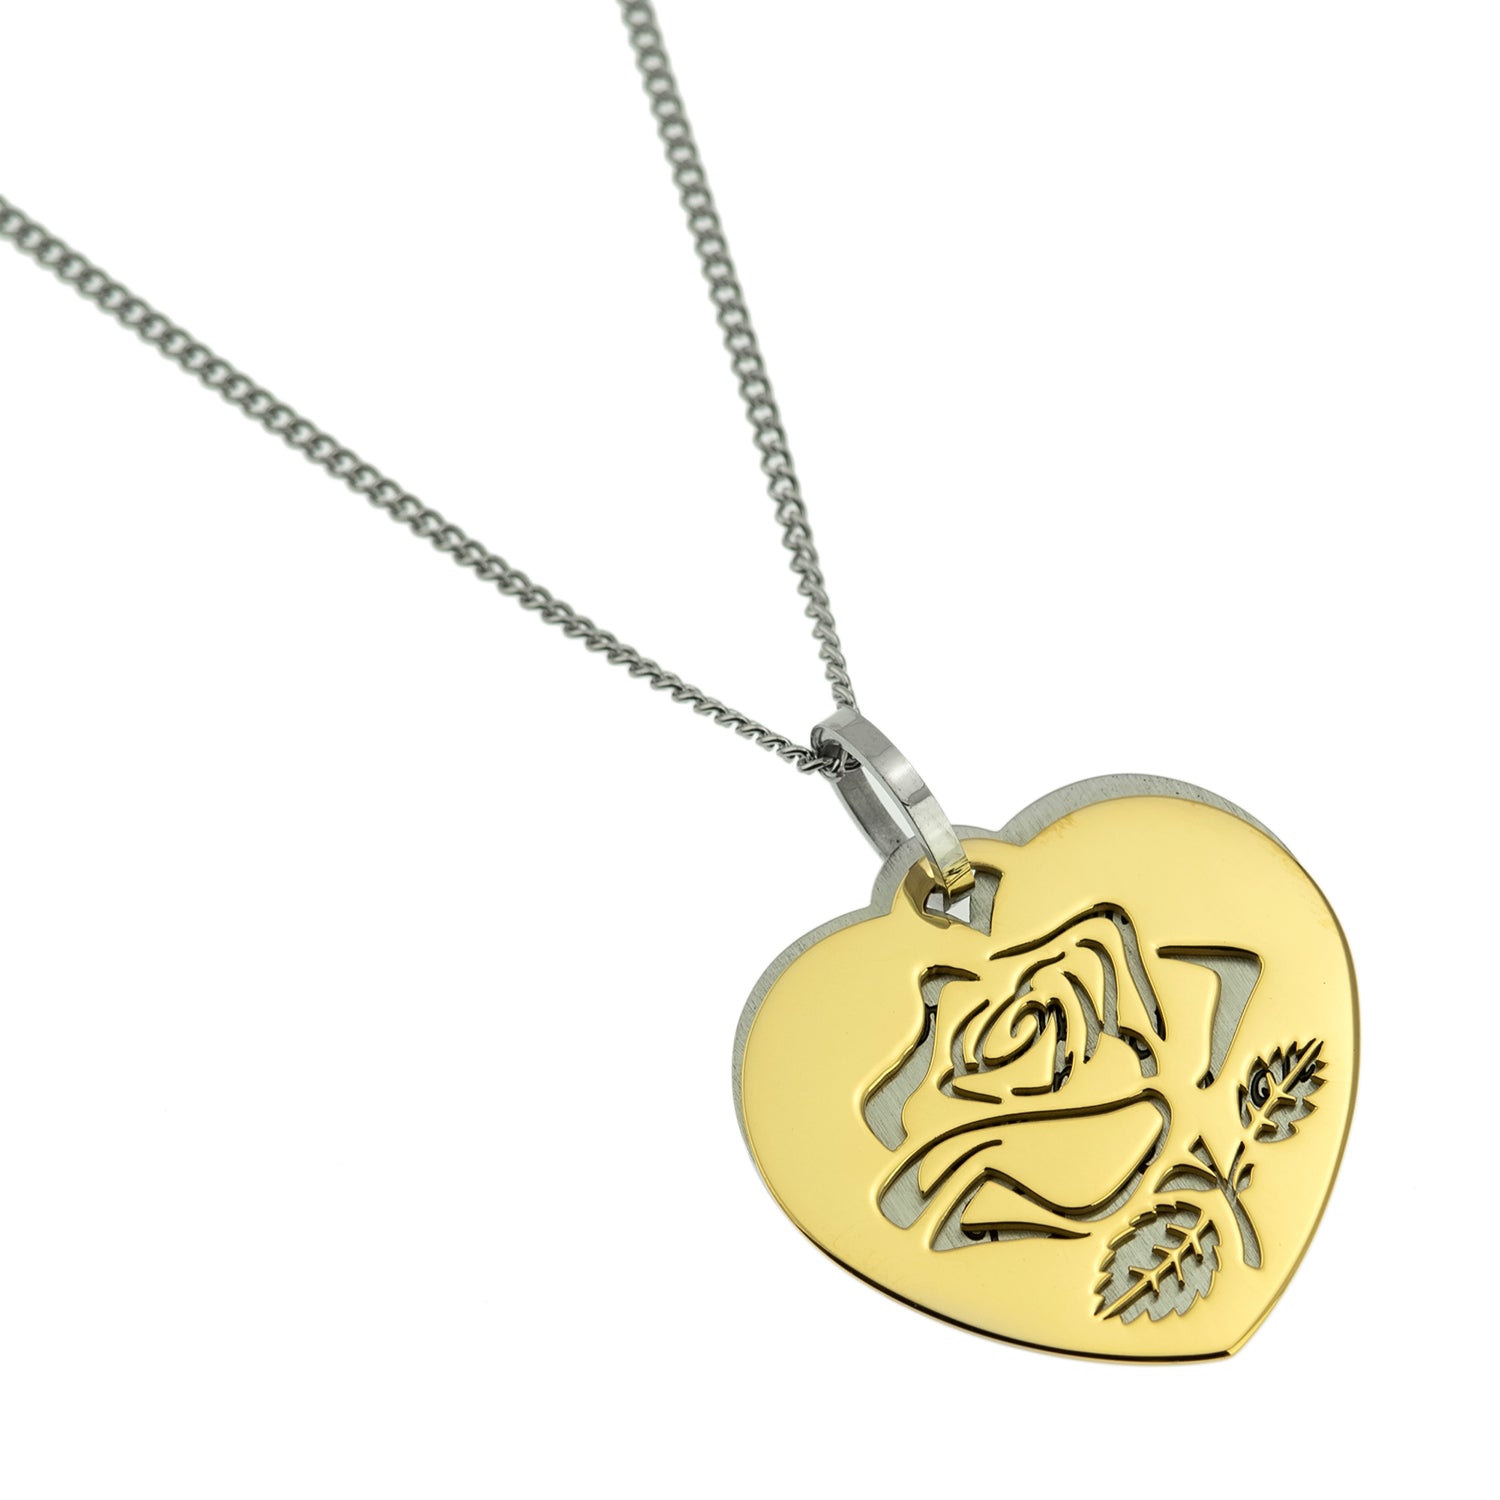 Gold Rose Heart Pendant Necklace - Engraved "Words Can't Tell How Much I Love You"